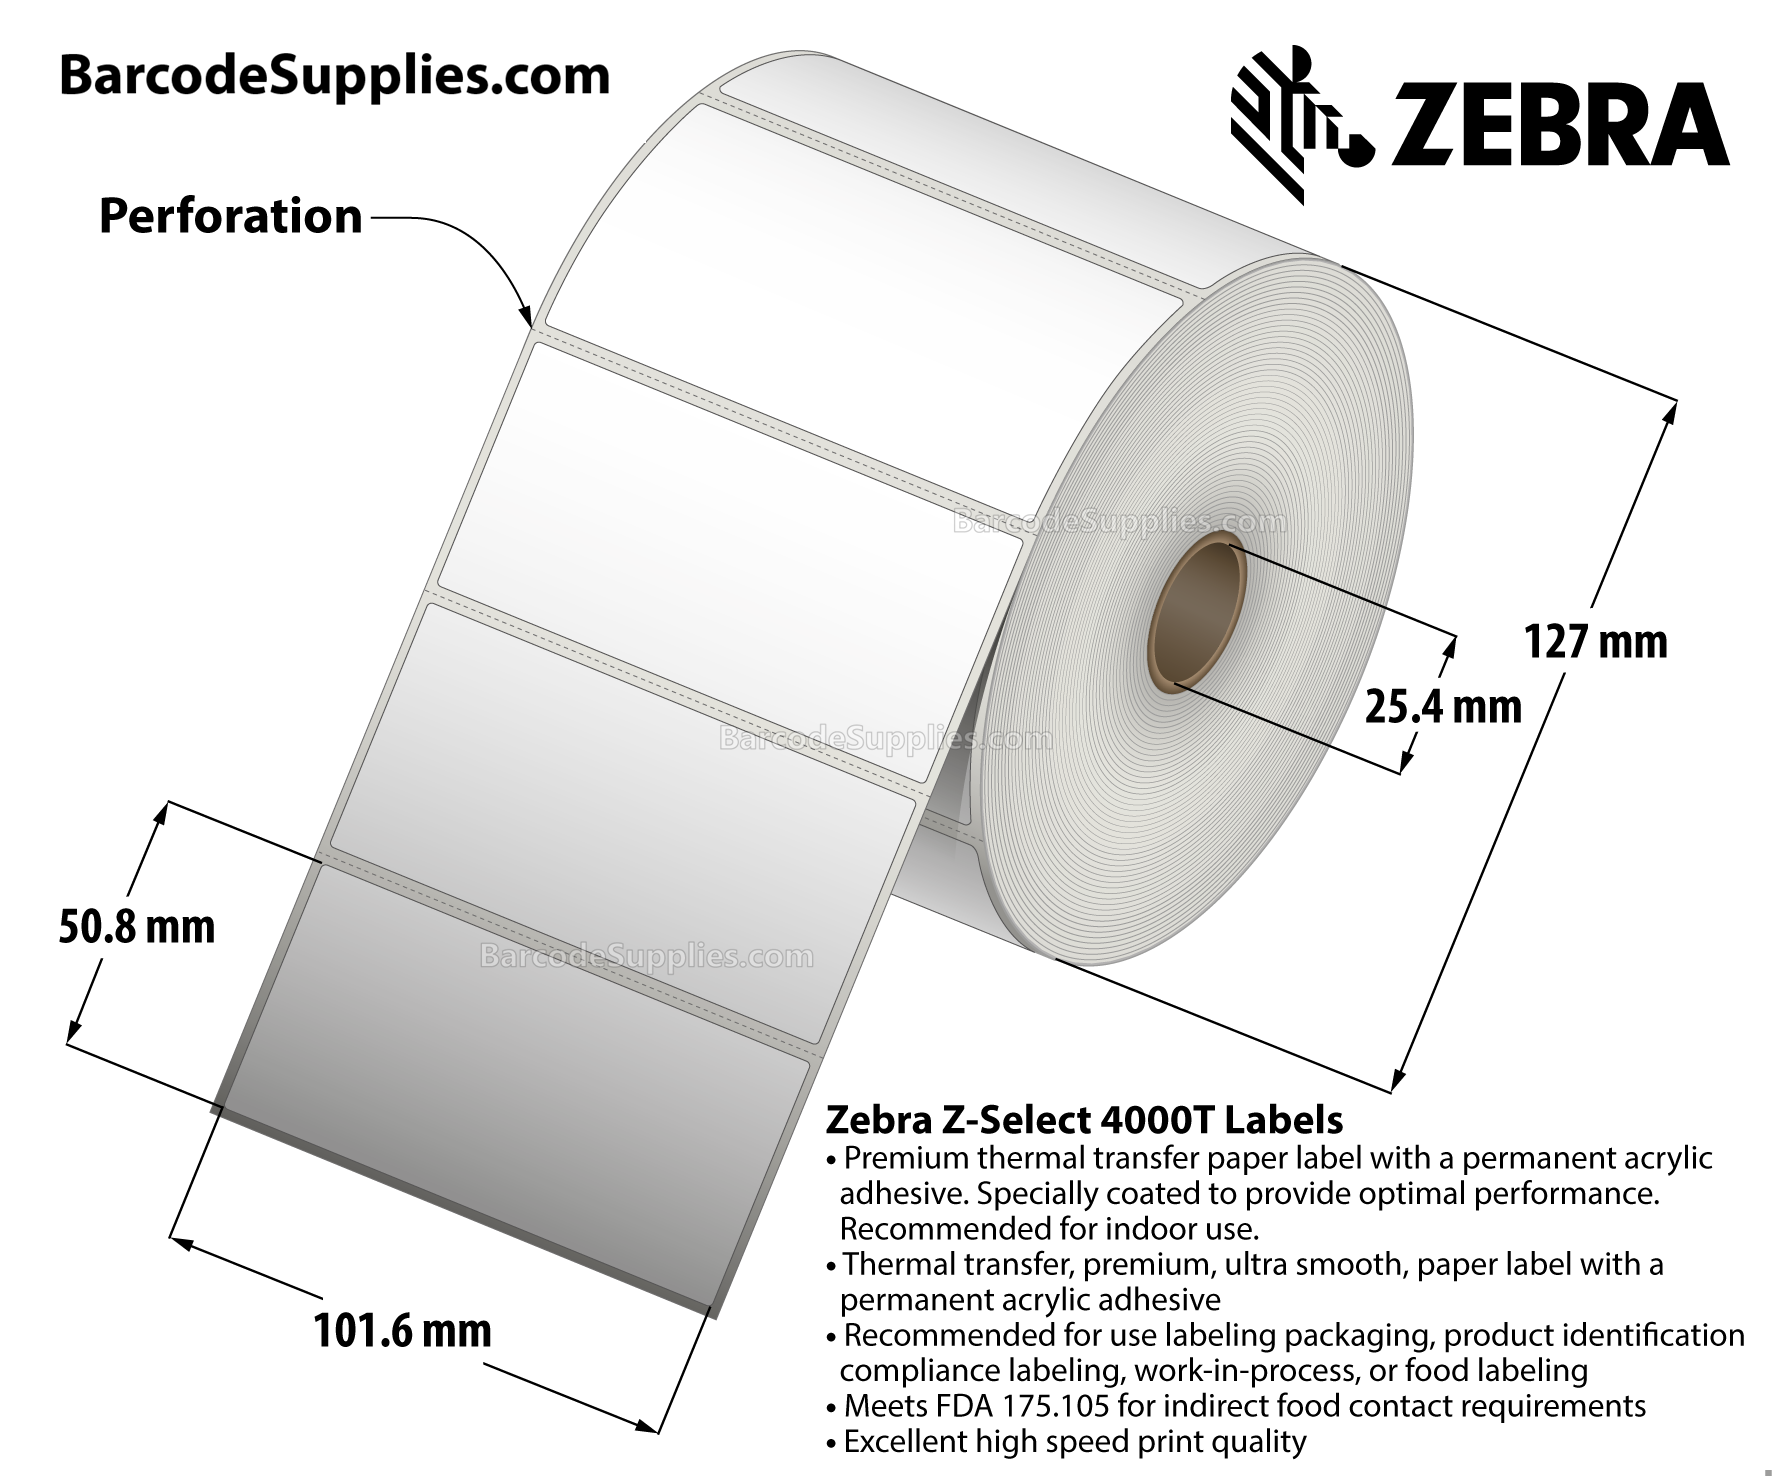 4 x 2 Thermal Transfer White Z-Select 4000T Labels With Permanent Adhesive - Perforated - 1370 Labels Per Roll - Carton Of 6 Rolls - 8220 Labels Total - MPN: 10009530